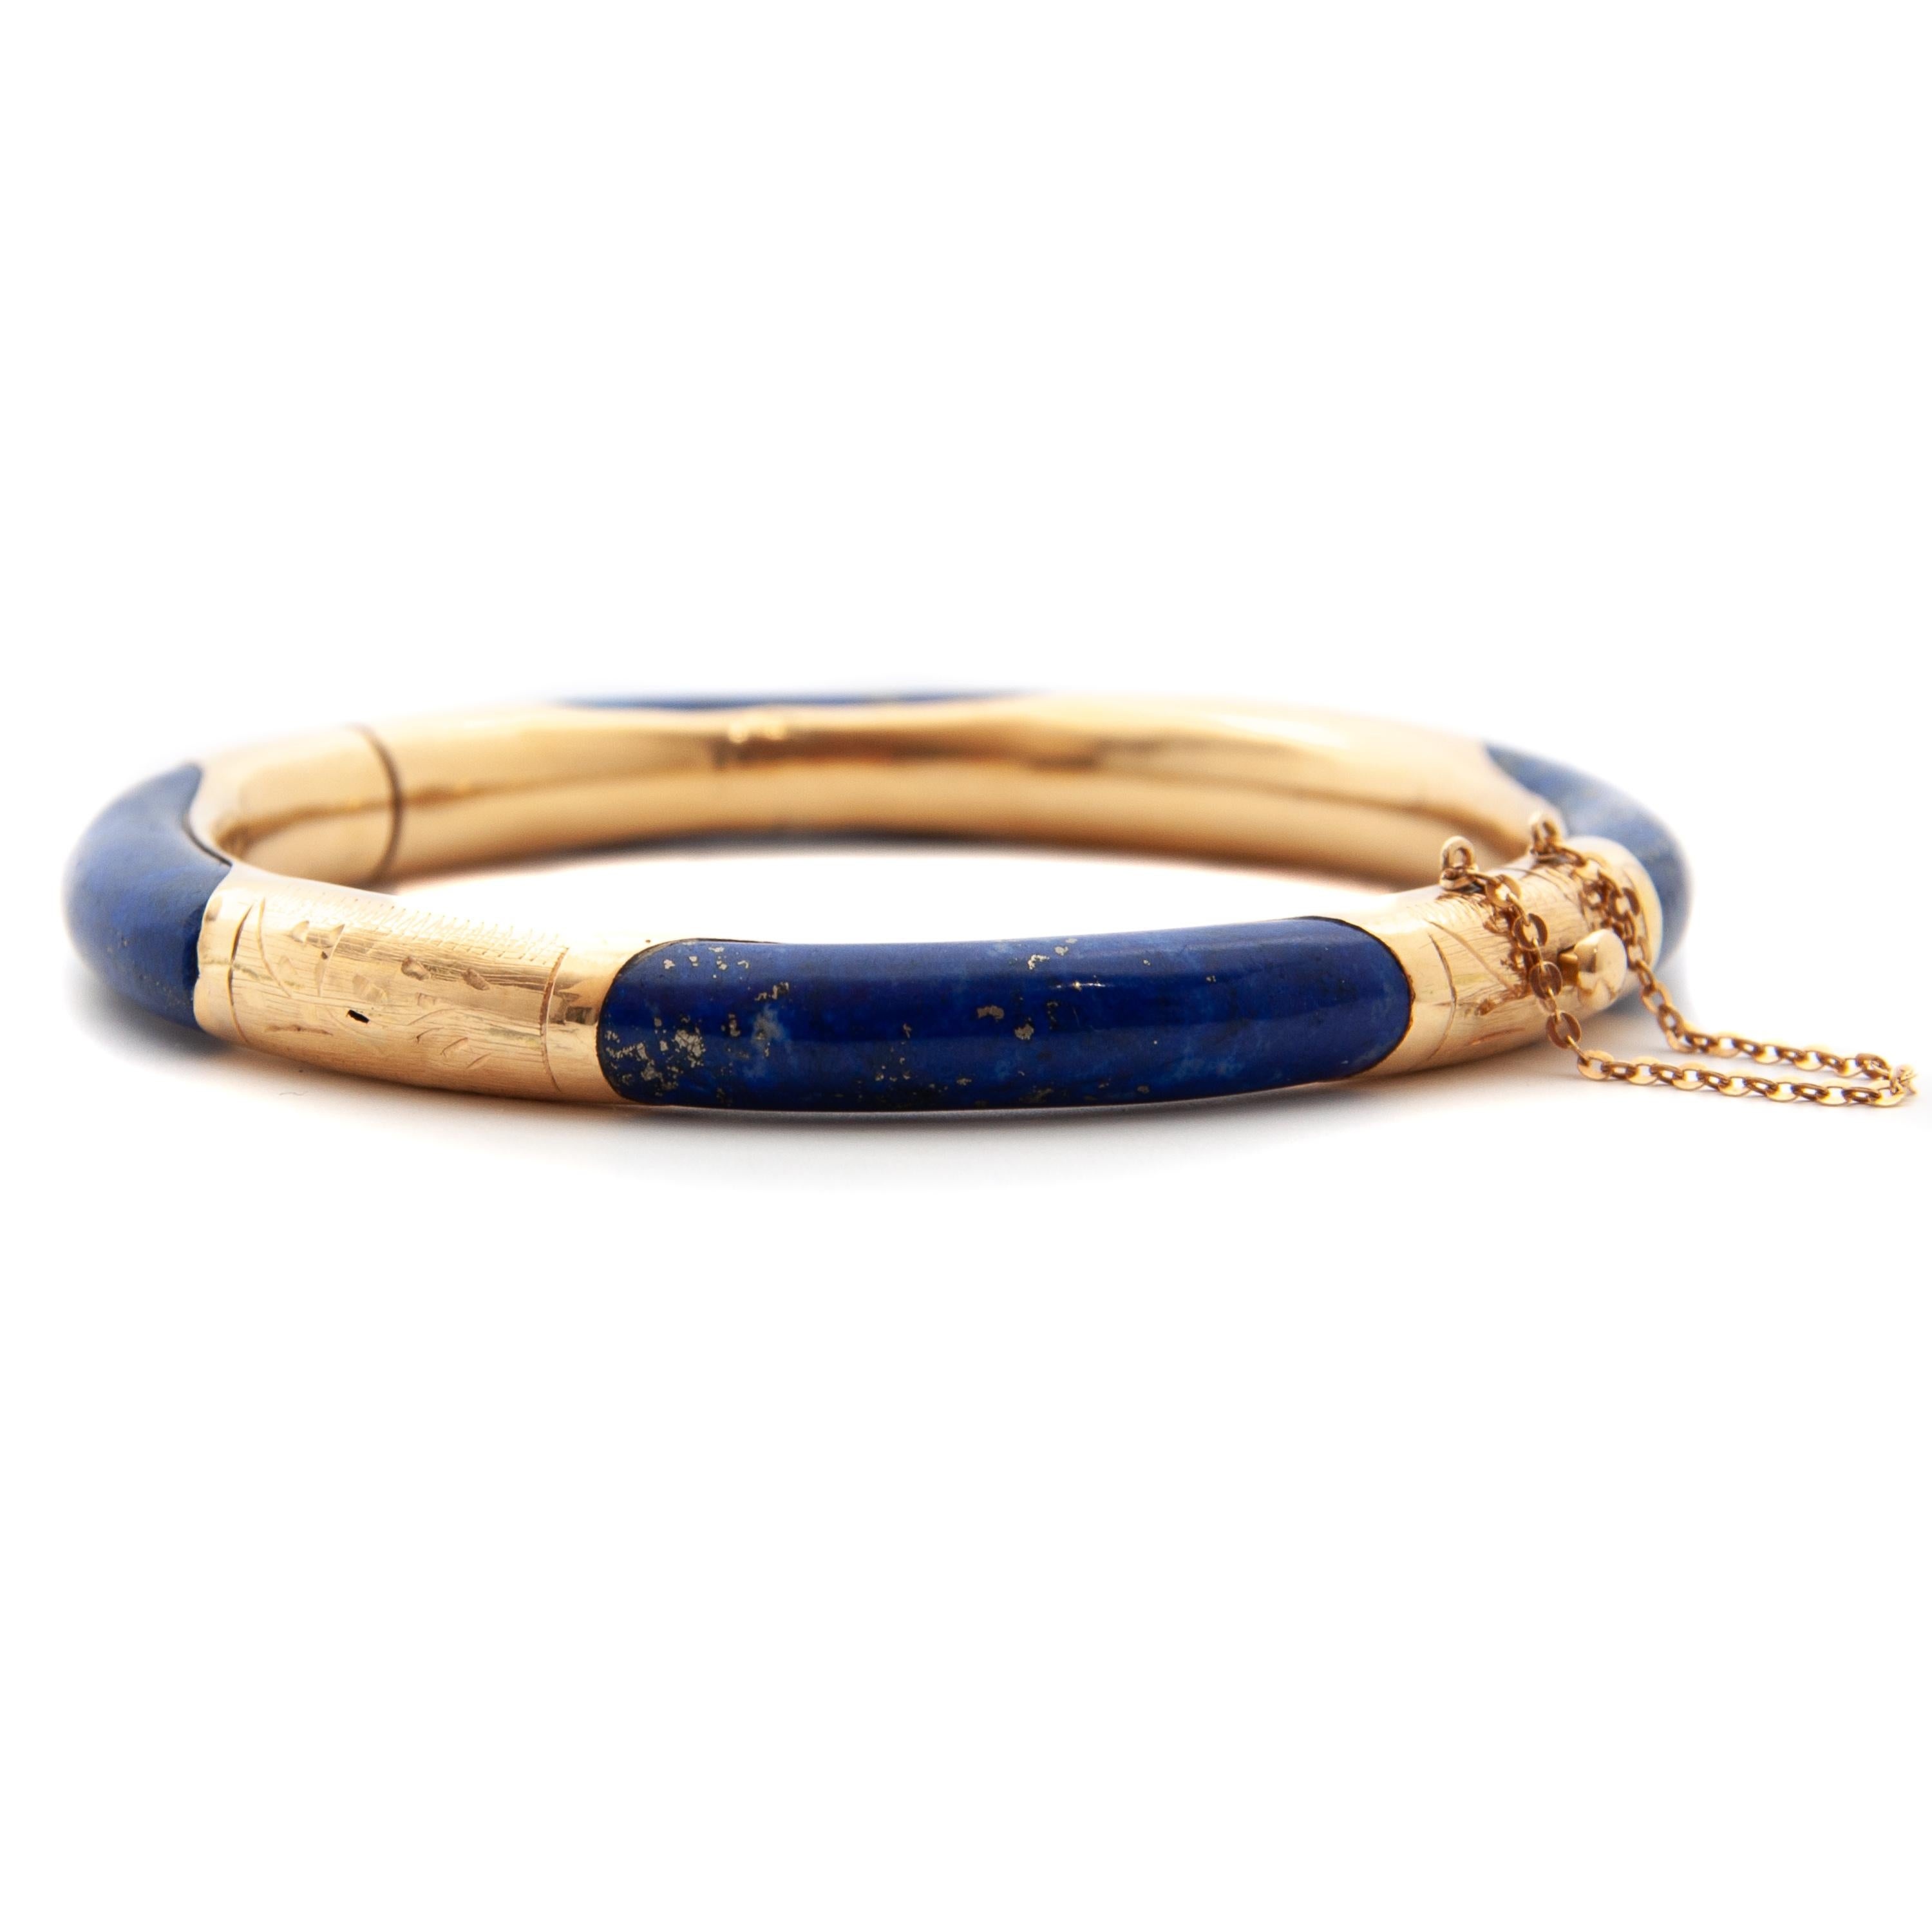 Gorgeous vintage lapis lazuli bracelet from mid-20th century. This lovely piece features a smooth blue stone from lapis lazuli, which is set within a 14 karat gold setting. The bracelet is hinged and has beautifully etched motifs. The lapis is